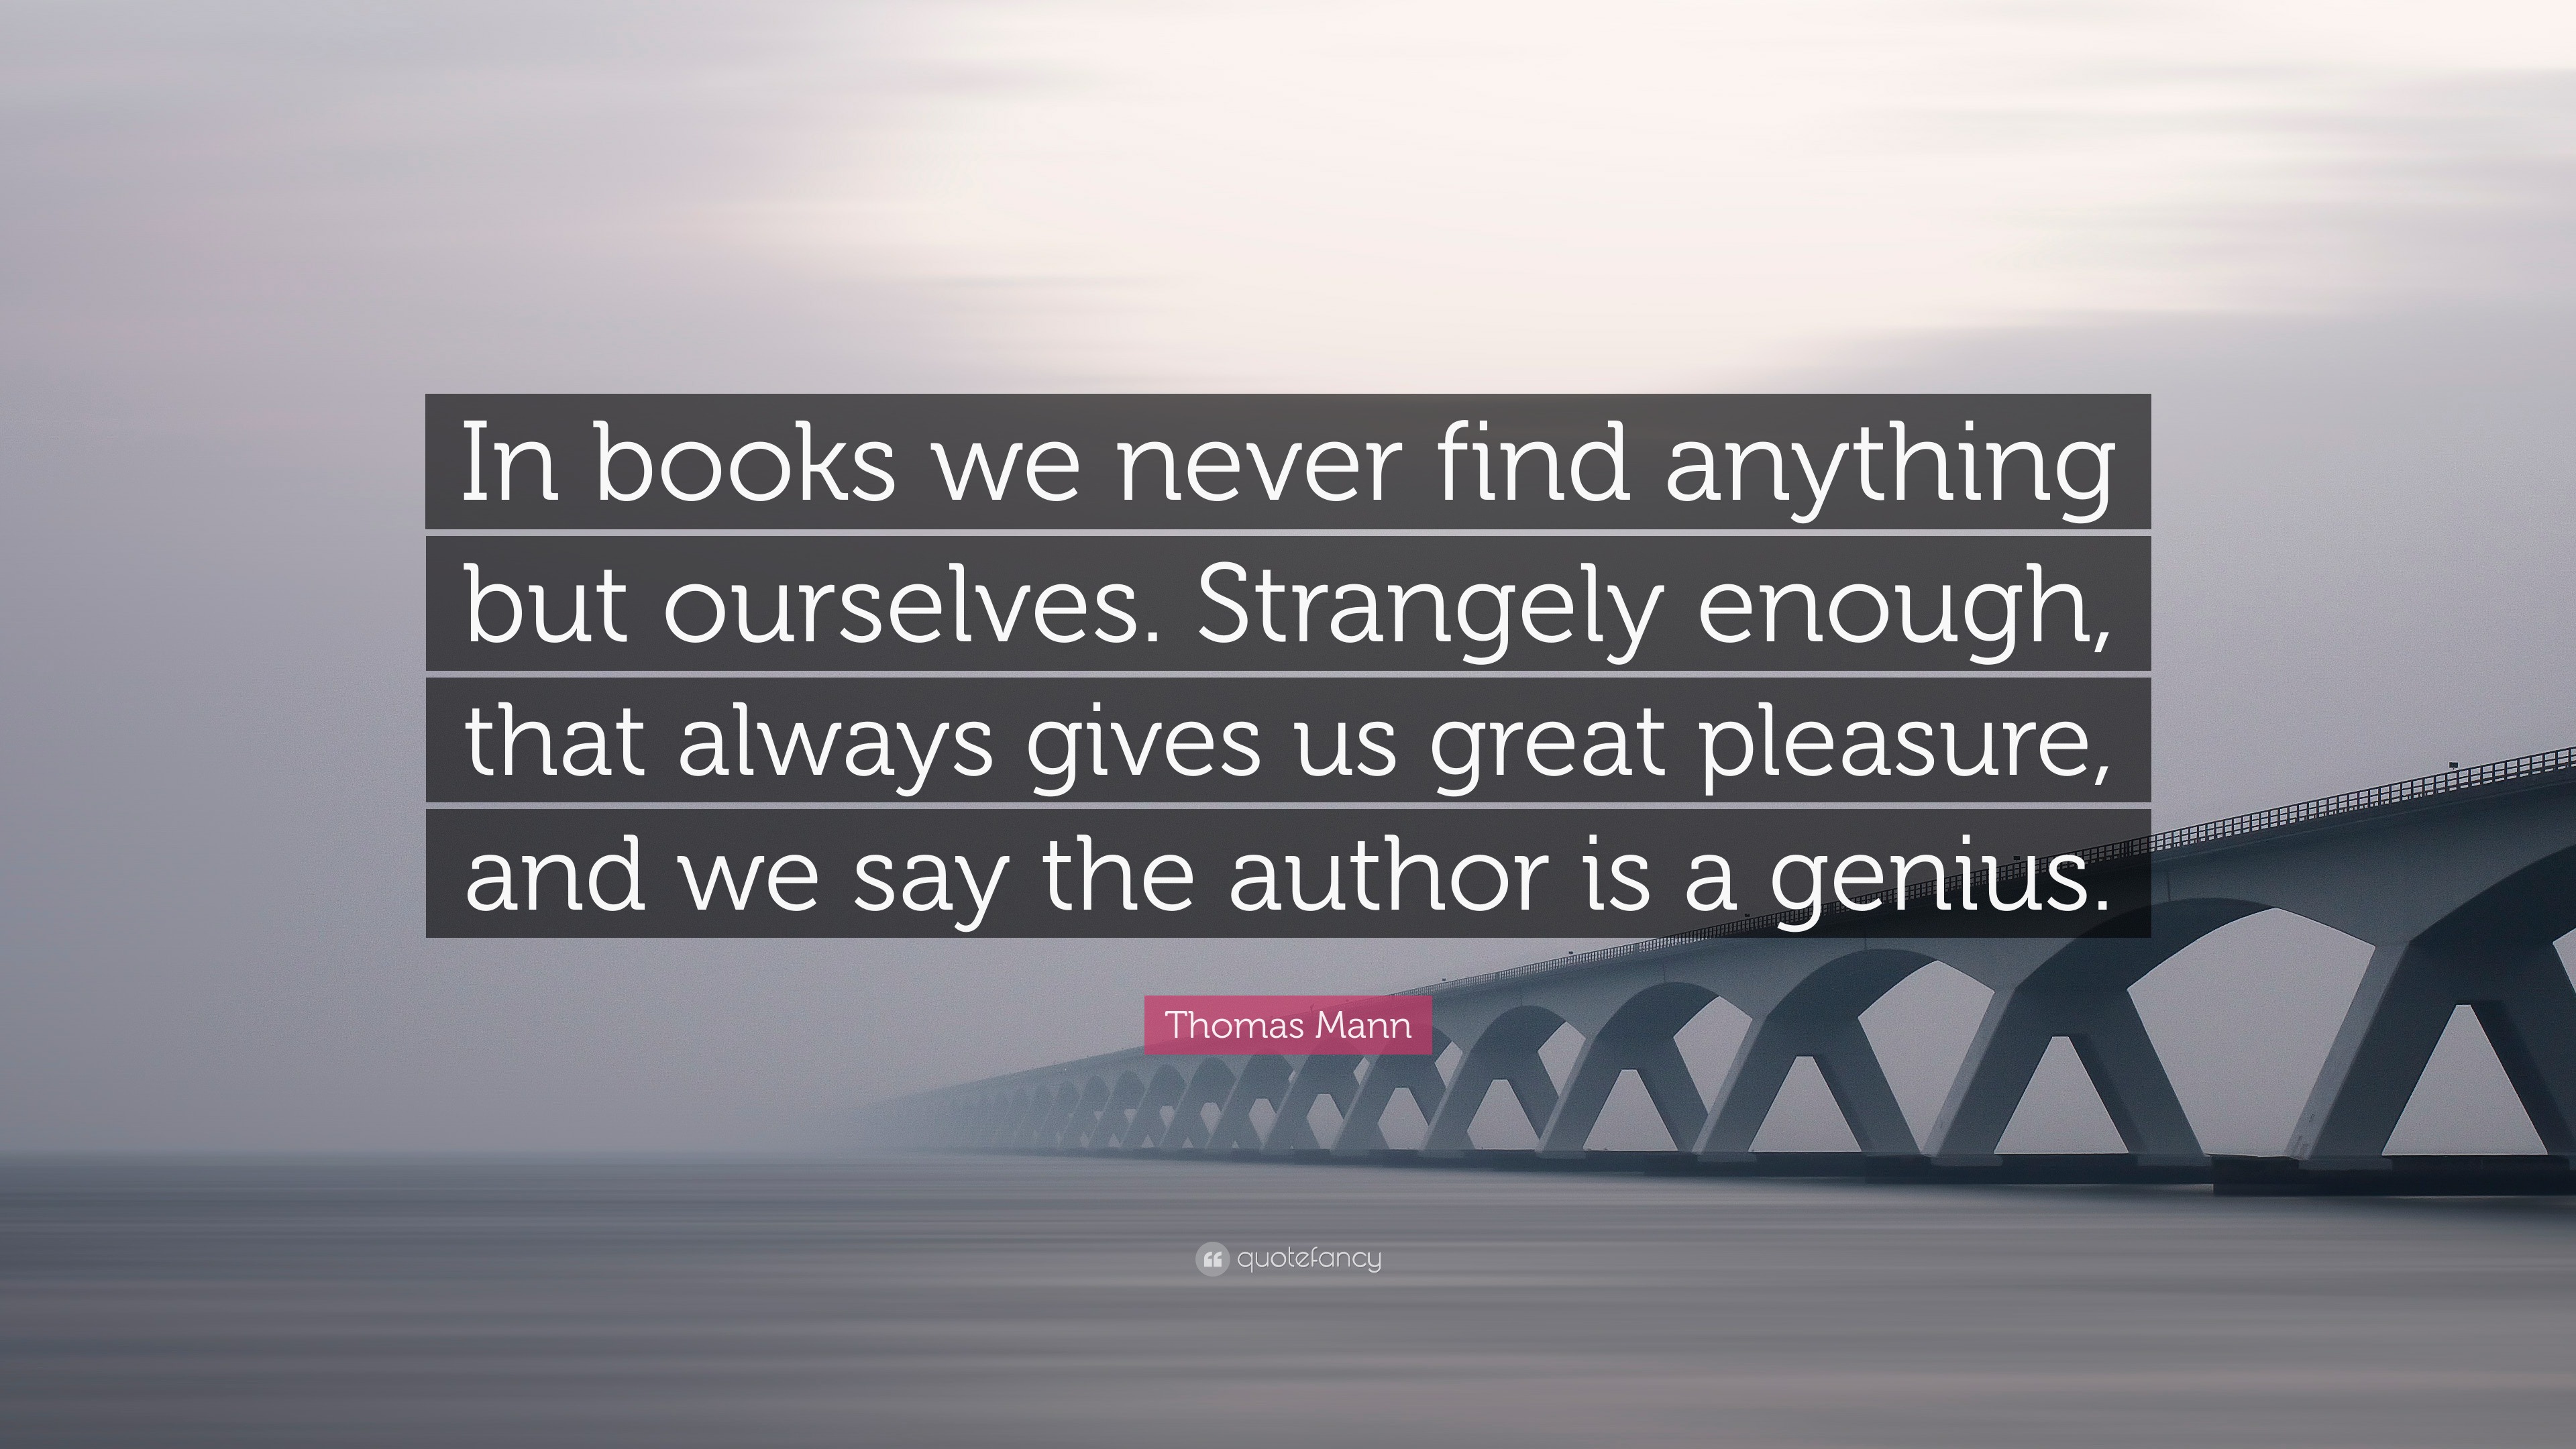 Thomas Mann Quote: “In books we never find anything but ourselves ...